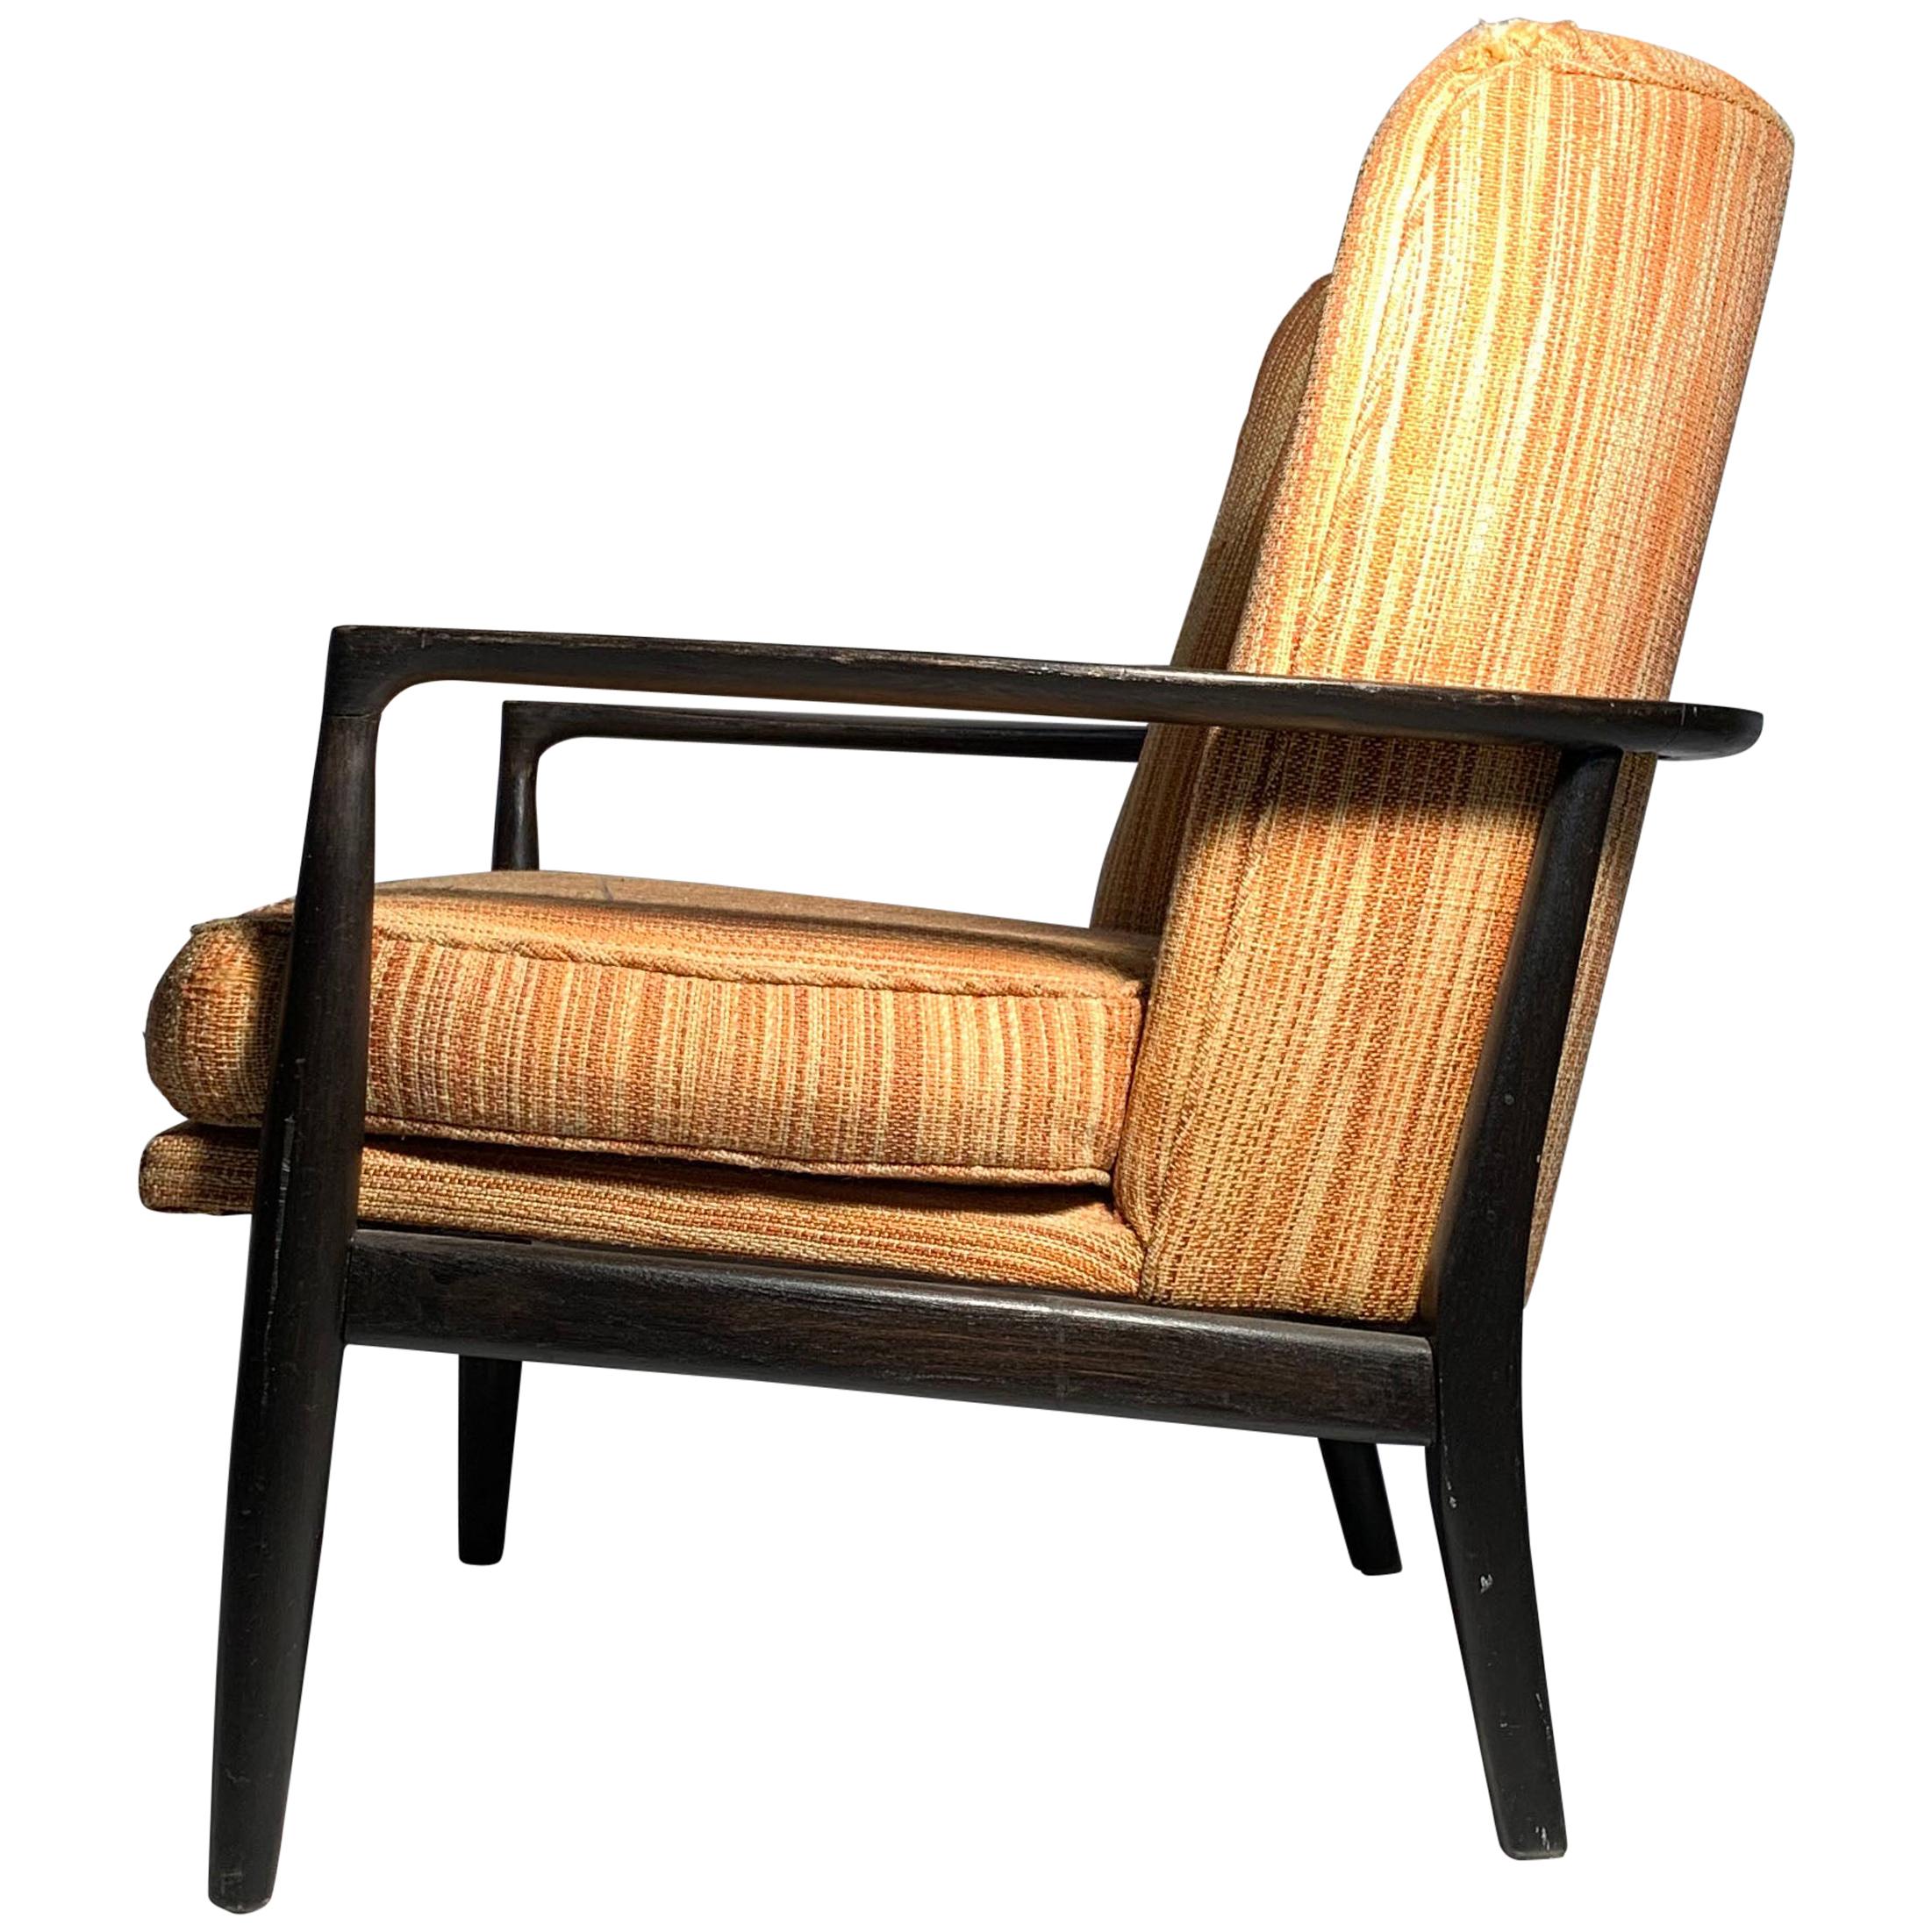 Lawrence Peabody Lounge Chair Model 982 for Nemschoff